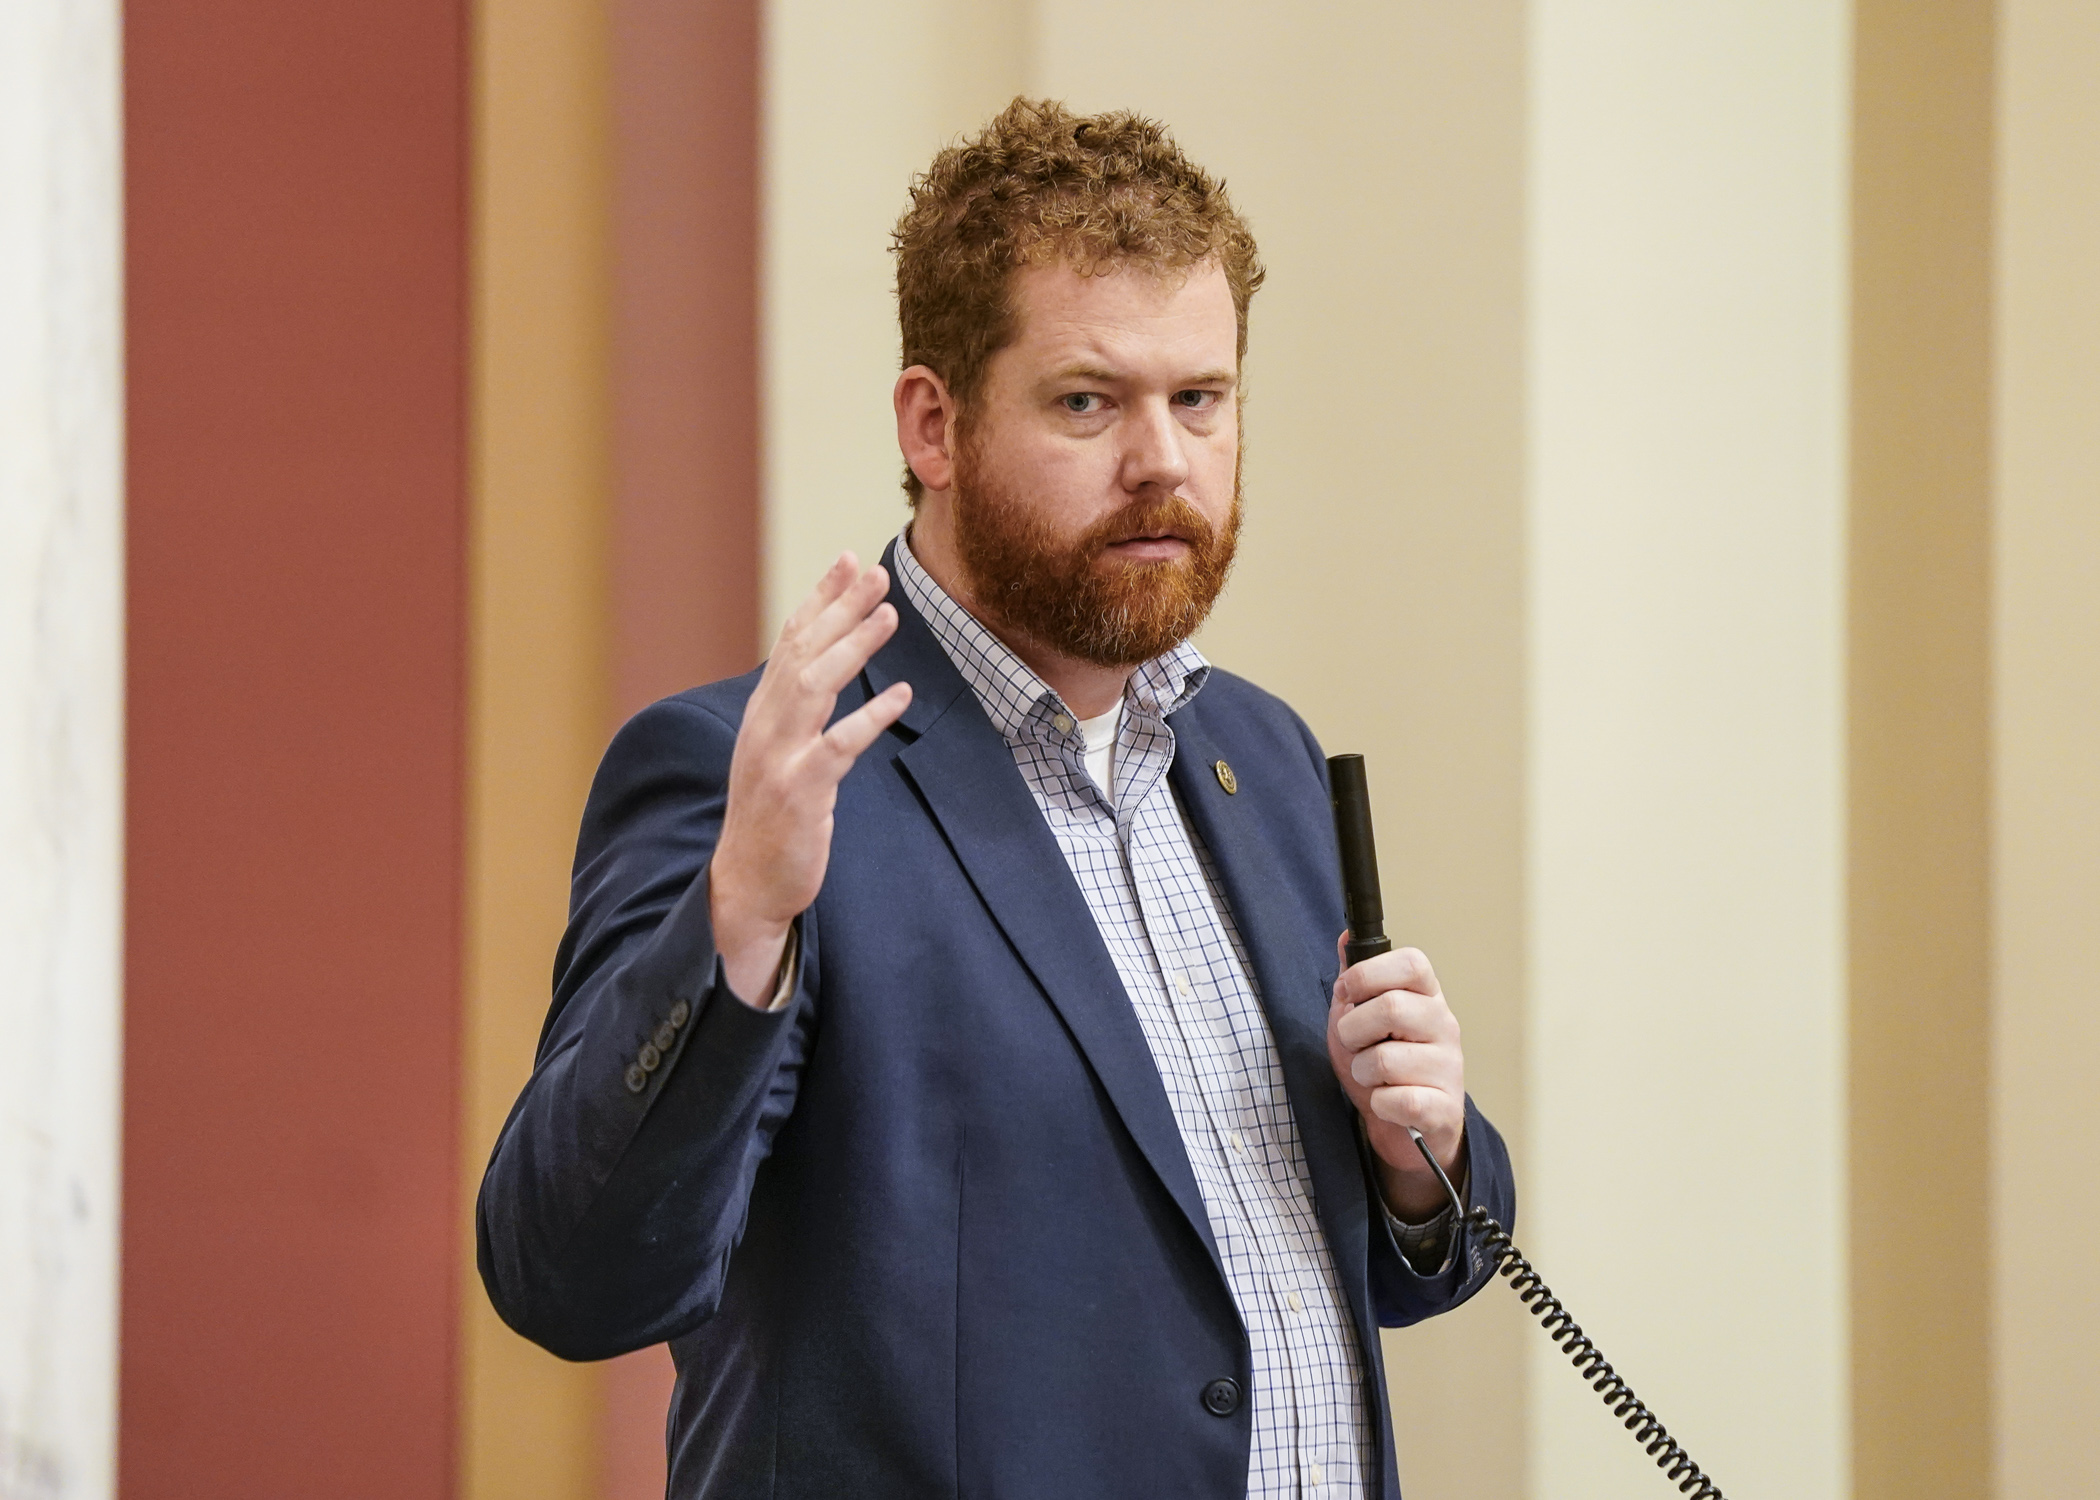 Speaking from the House Floor, Rep. Zack Stephenson urges his colleagues to vote for SF2744, the omnibus commerce finance bill, April 27. (Photo by Catherine Davis)